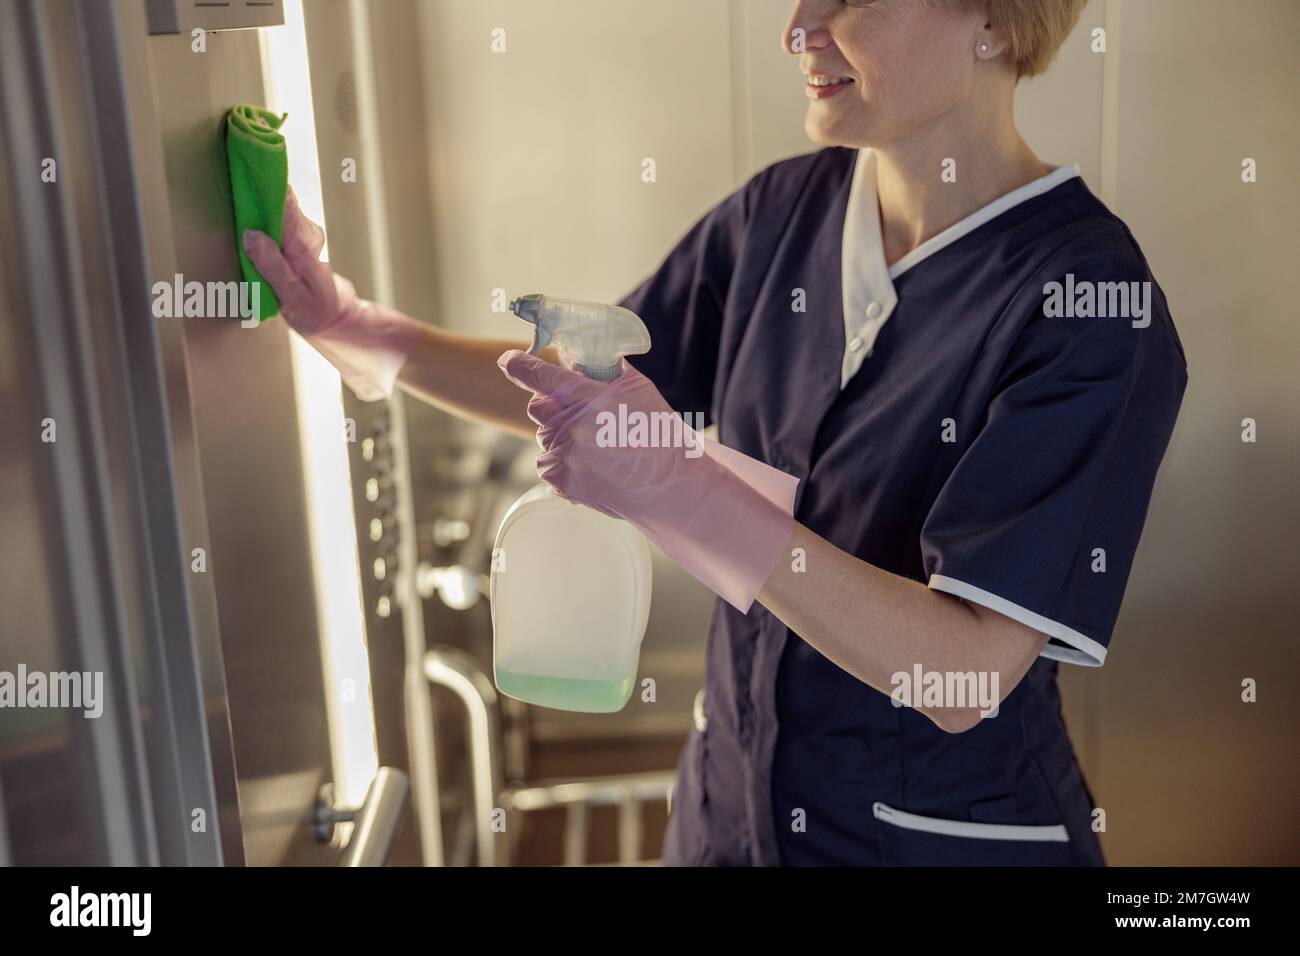 Close up of chambermaid wearing uniform and gloves cleaning elevator with detergent and rag Stock Photo